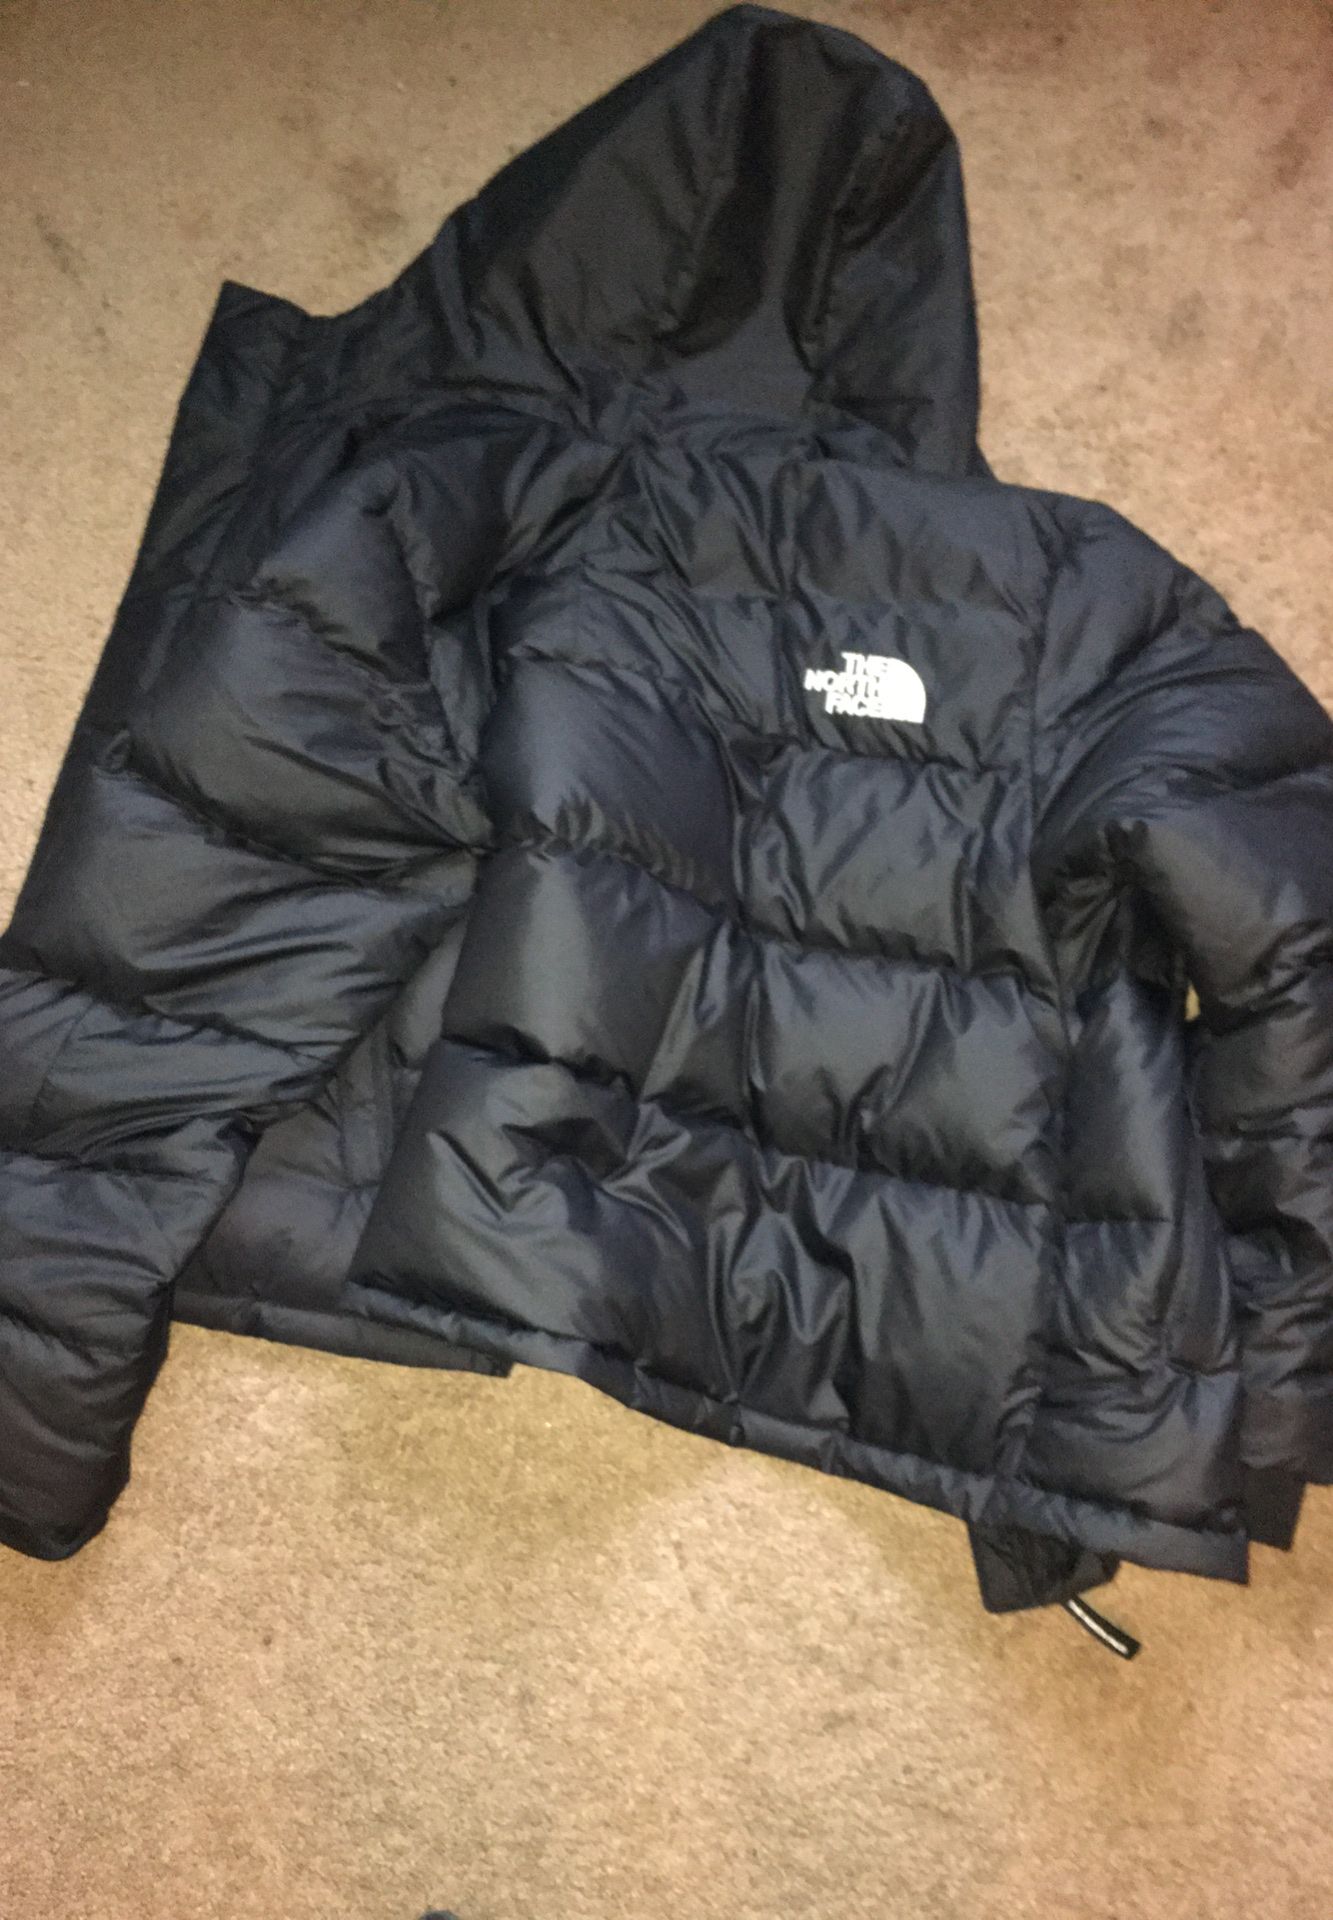 New North face jacket